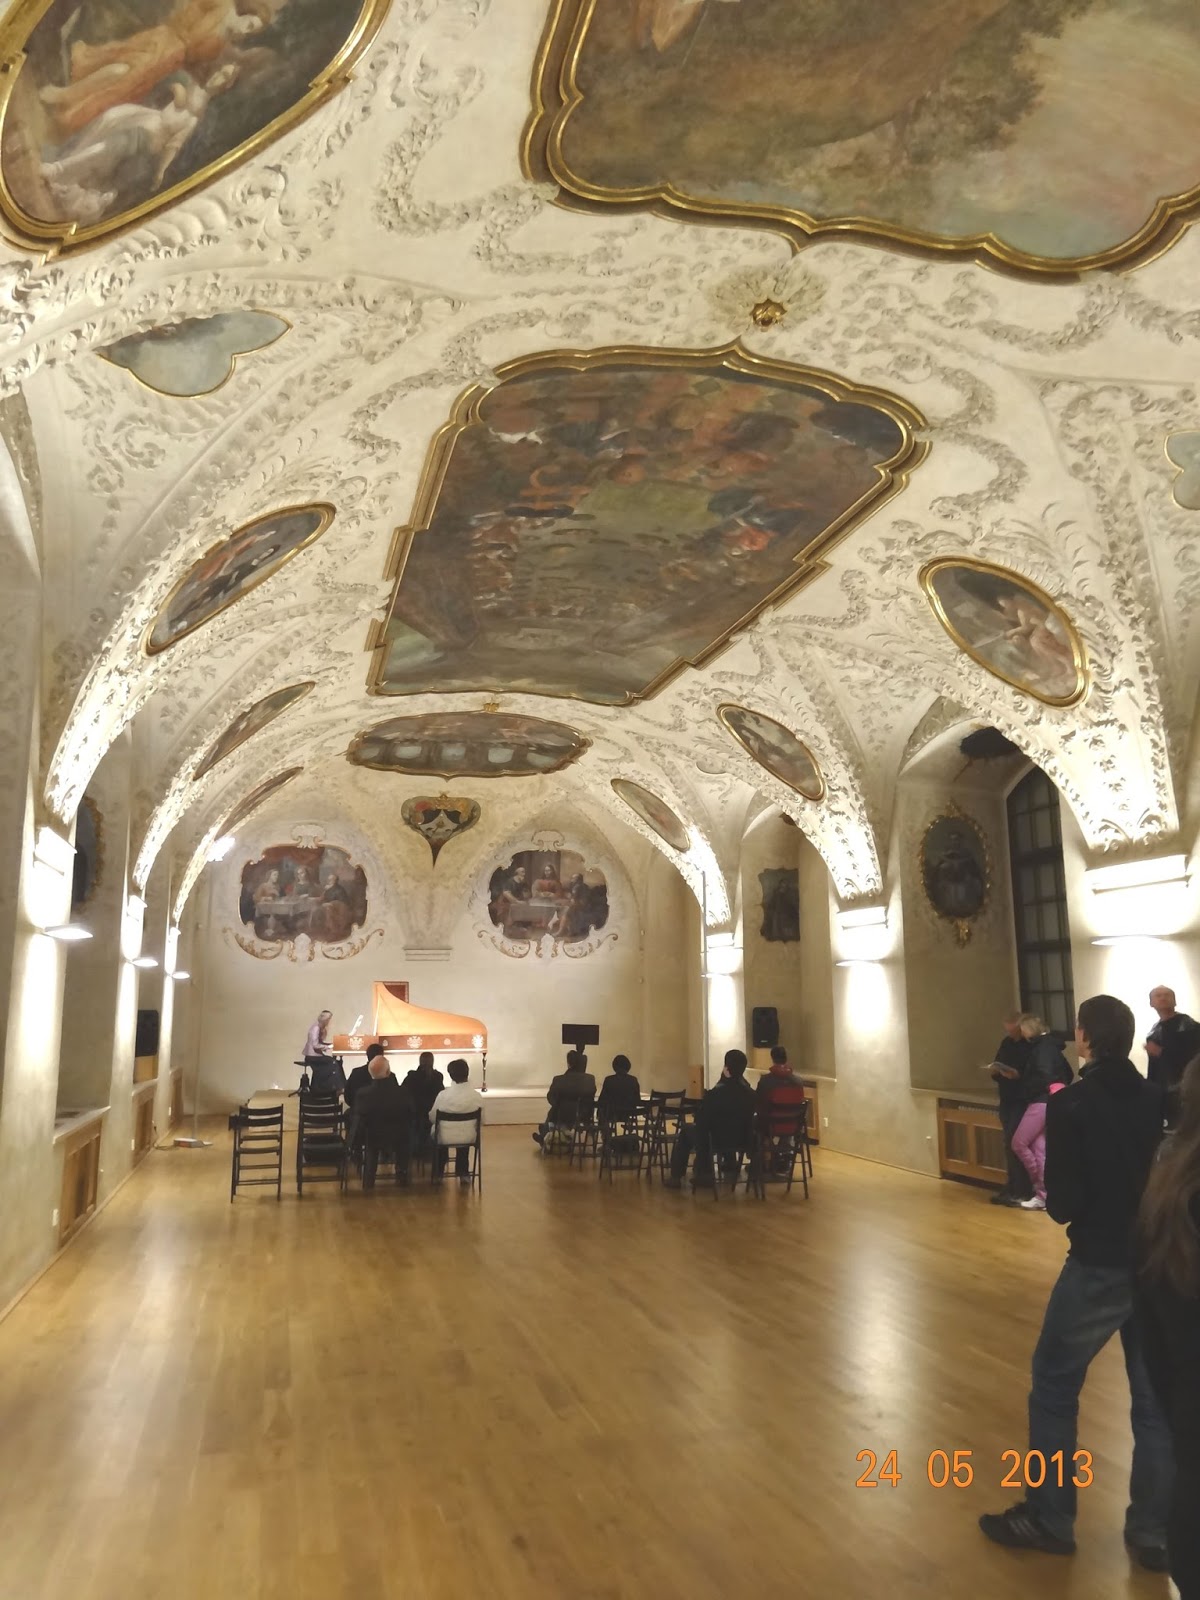 The most beautiful room of monastery is the baroque refectory (dining room of monks), where also many social events take place.  Also Milos Forman's film "Amadeus" has been shooting in the room.